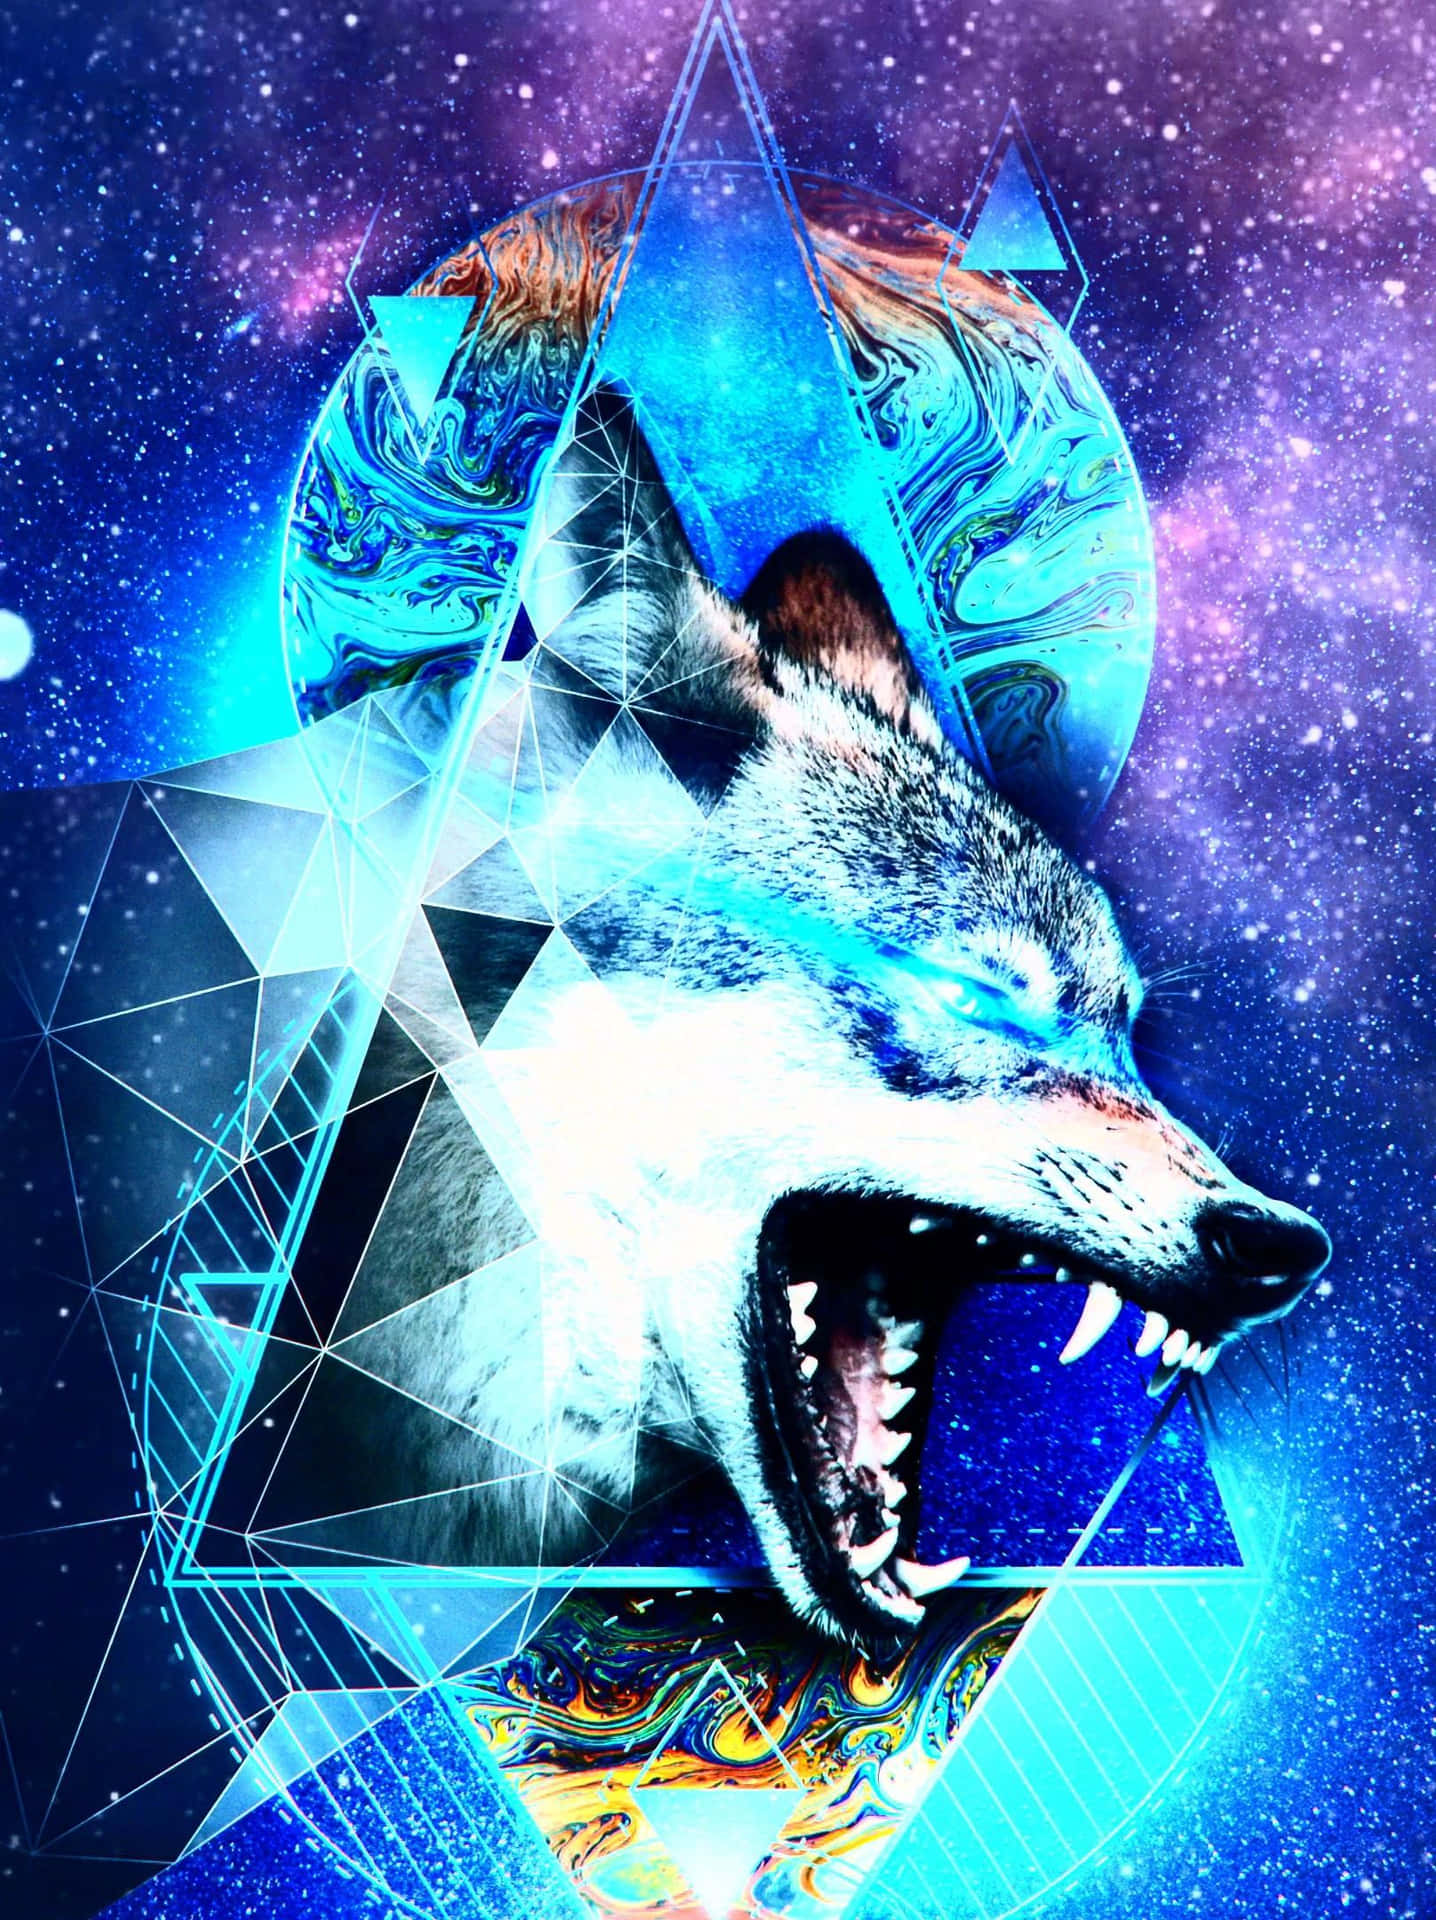 “Follow the majesty of the galaxy wolf through the stars!”